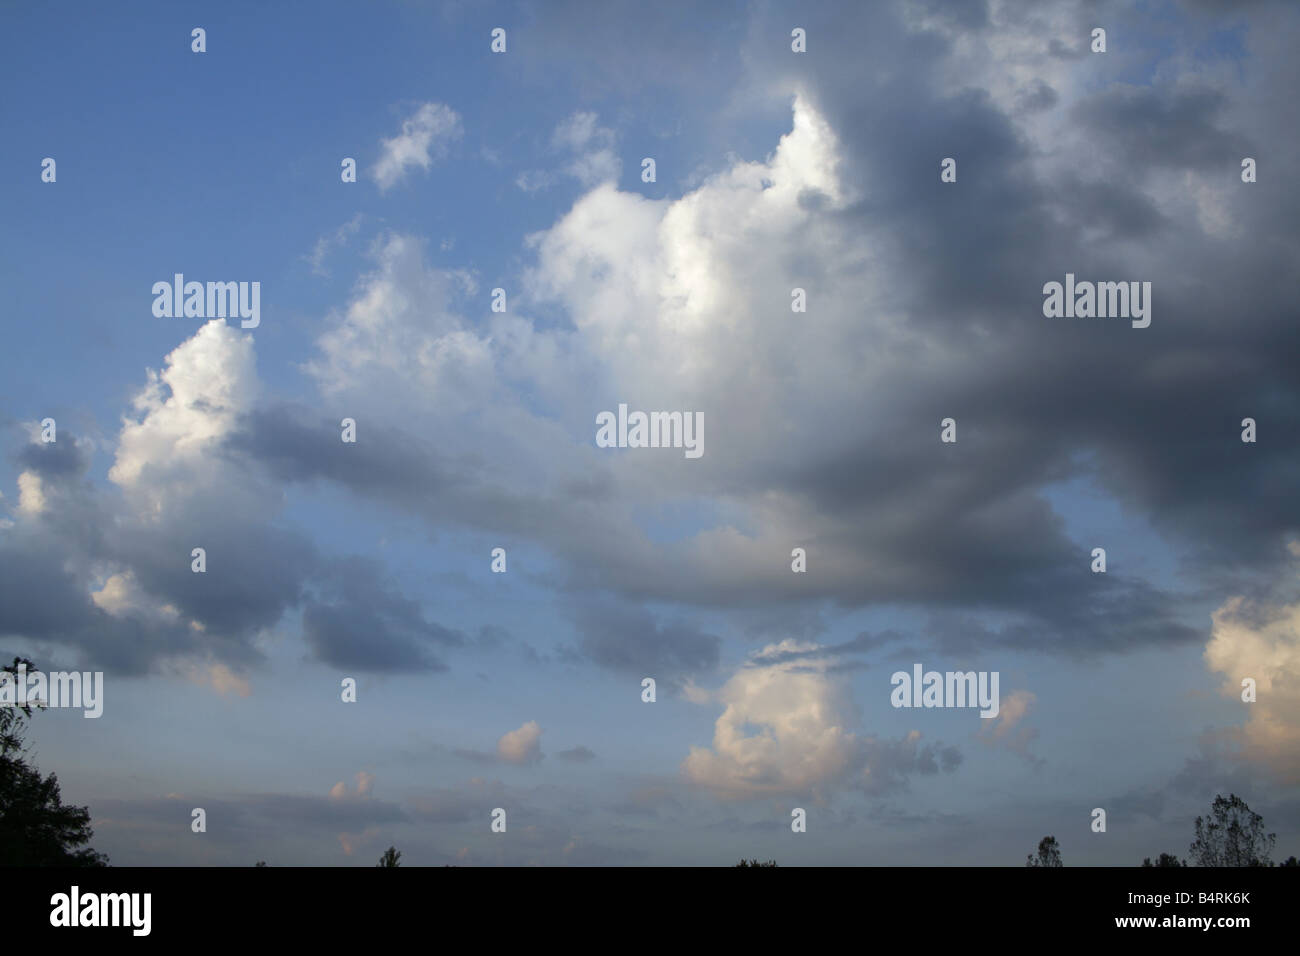 Drifting Cumulus Clouds With Grey Bases Against Blue Sky Stock Photo